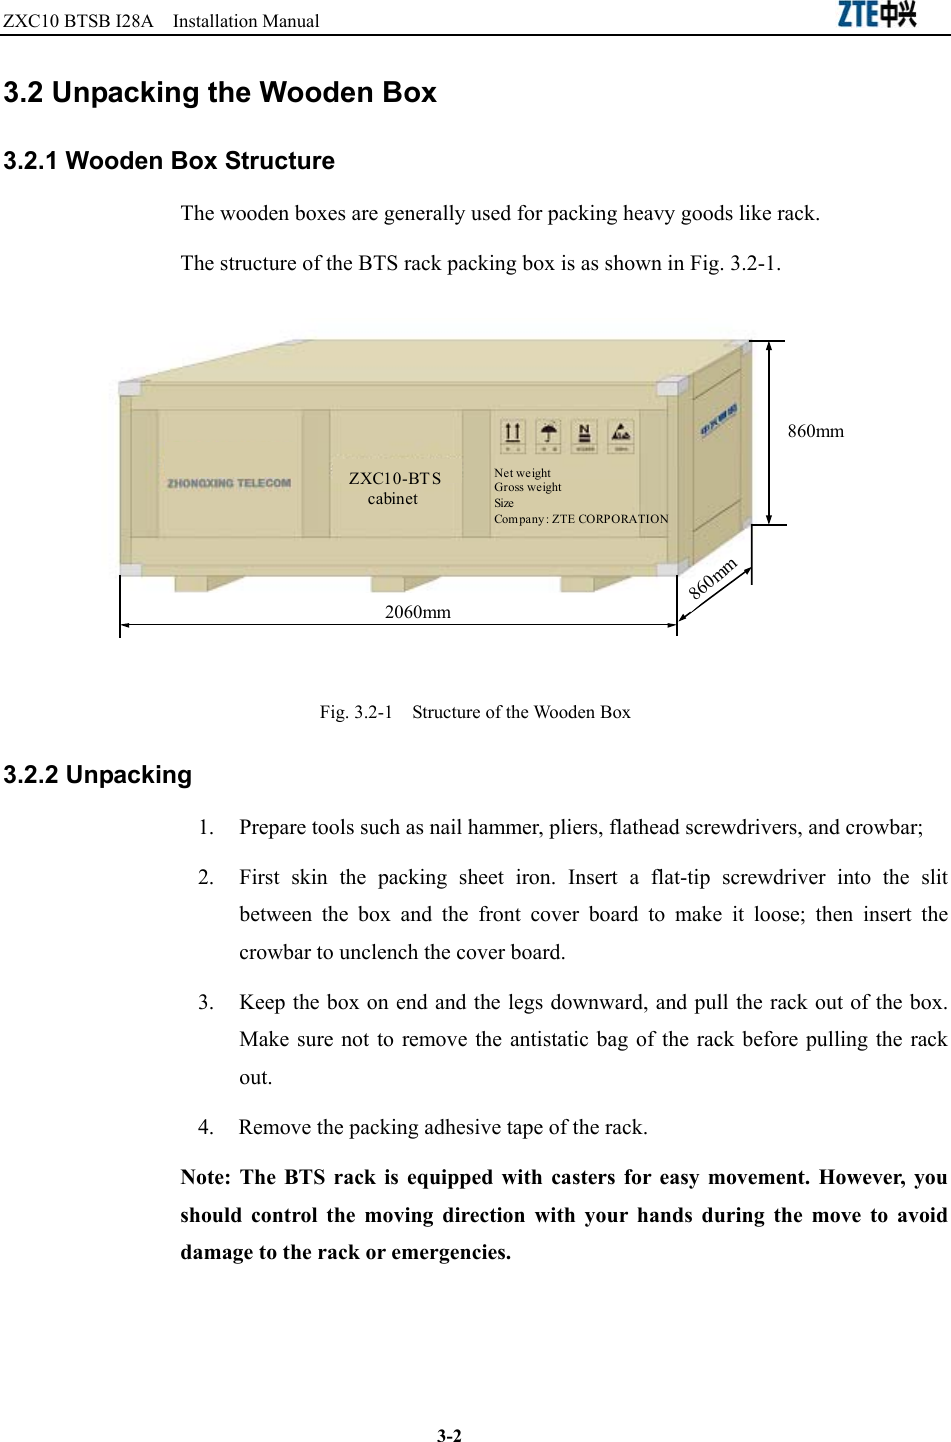 ZXC10 BTSB I28A  Installation Manual                                                          3-2 3.2 Unpacking the Wooden Box 3.2.1 Wooden Box Structure The wooden boxes are generally used for packing heavy goods like rack. The structure of the BTS rack packing box is as shown in Fig. 3.2-1.   2060mm860mm860mmZXC10-BTScabinetNet weightGross weightSizeCompany: ZTE CORPORATION Fig. 3.2-1    Structure of the Wooden Box 3.2.2 Unpacking   1.  Prepare tools such as nail hammer, pliers, flathead screwdrivers, and crowbar;   2.  First skin the packing sheet iron. Insert a flat-tip screwdriver into the slit between the box and the front cover board to make it loose; then insert the crowbar to unclench the cover board.   3.  Keep the box on end and the legs downward, and pull the rack out of the box. Make sure not to remove the antistatic bag of the rack before pulling the rack out. 4.  Remove the packing adhesive tape of the rack. Note: The BTS rack is equipped with casters for easy movement. However, you should control the moving direction with your hands during the move to avoid damage to the rack or emergencies.   